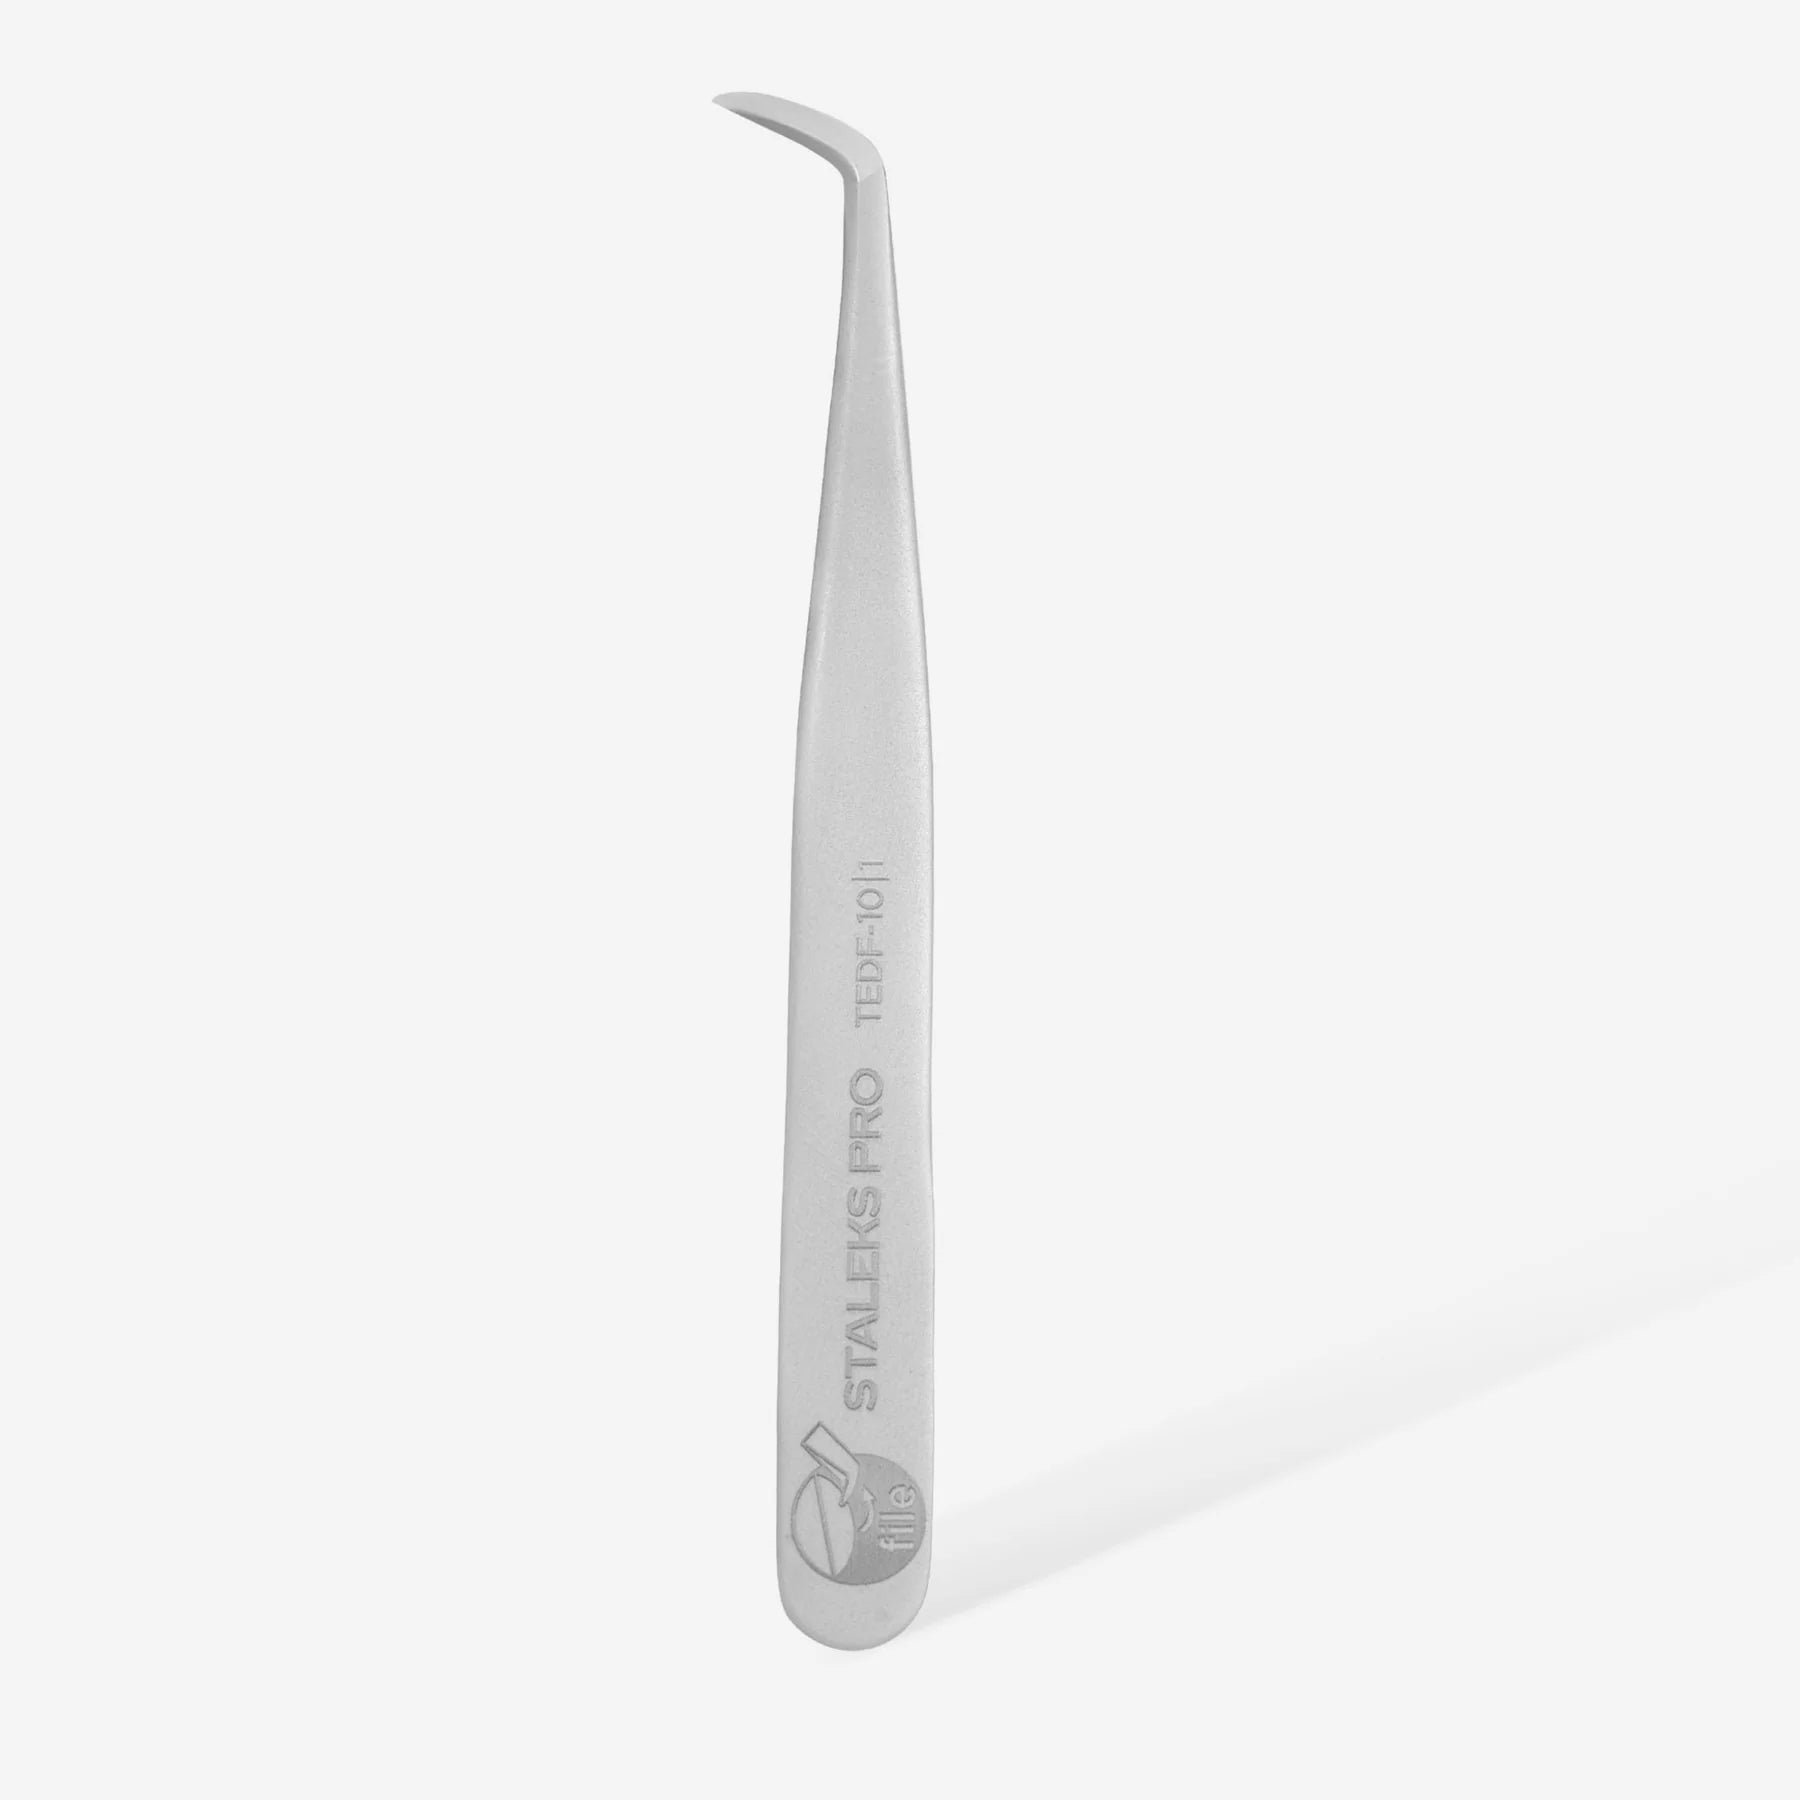 STALEKS PRO EXPERT 10 TYPE 1 TWEEZERS FOR WORK WITH DISPOSABLE FILES TEDF-10/1